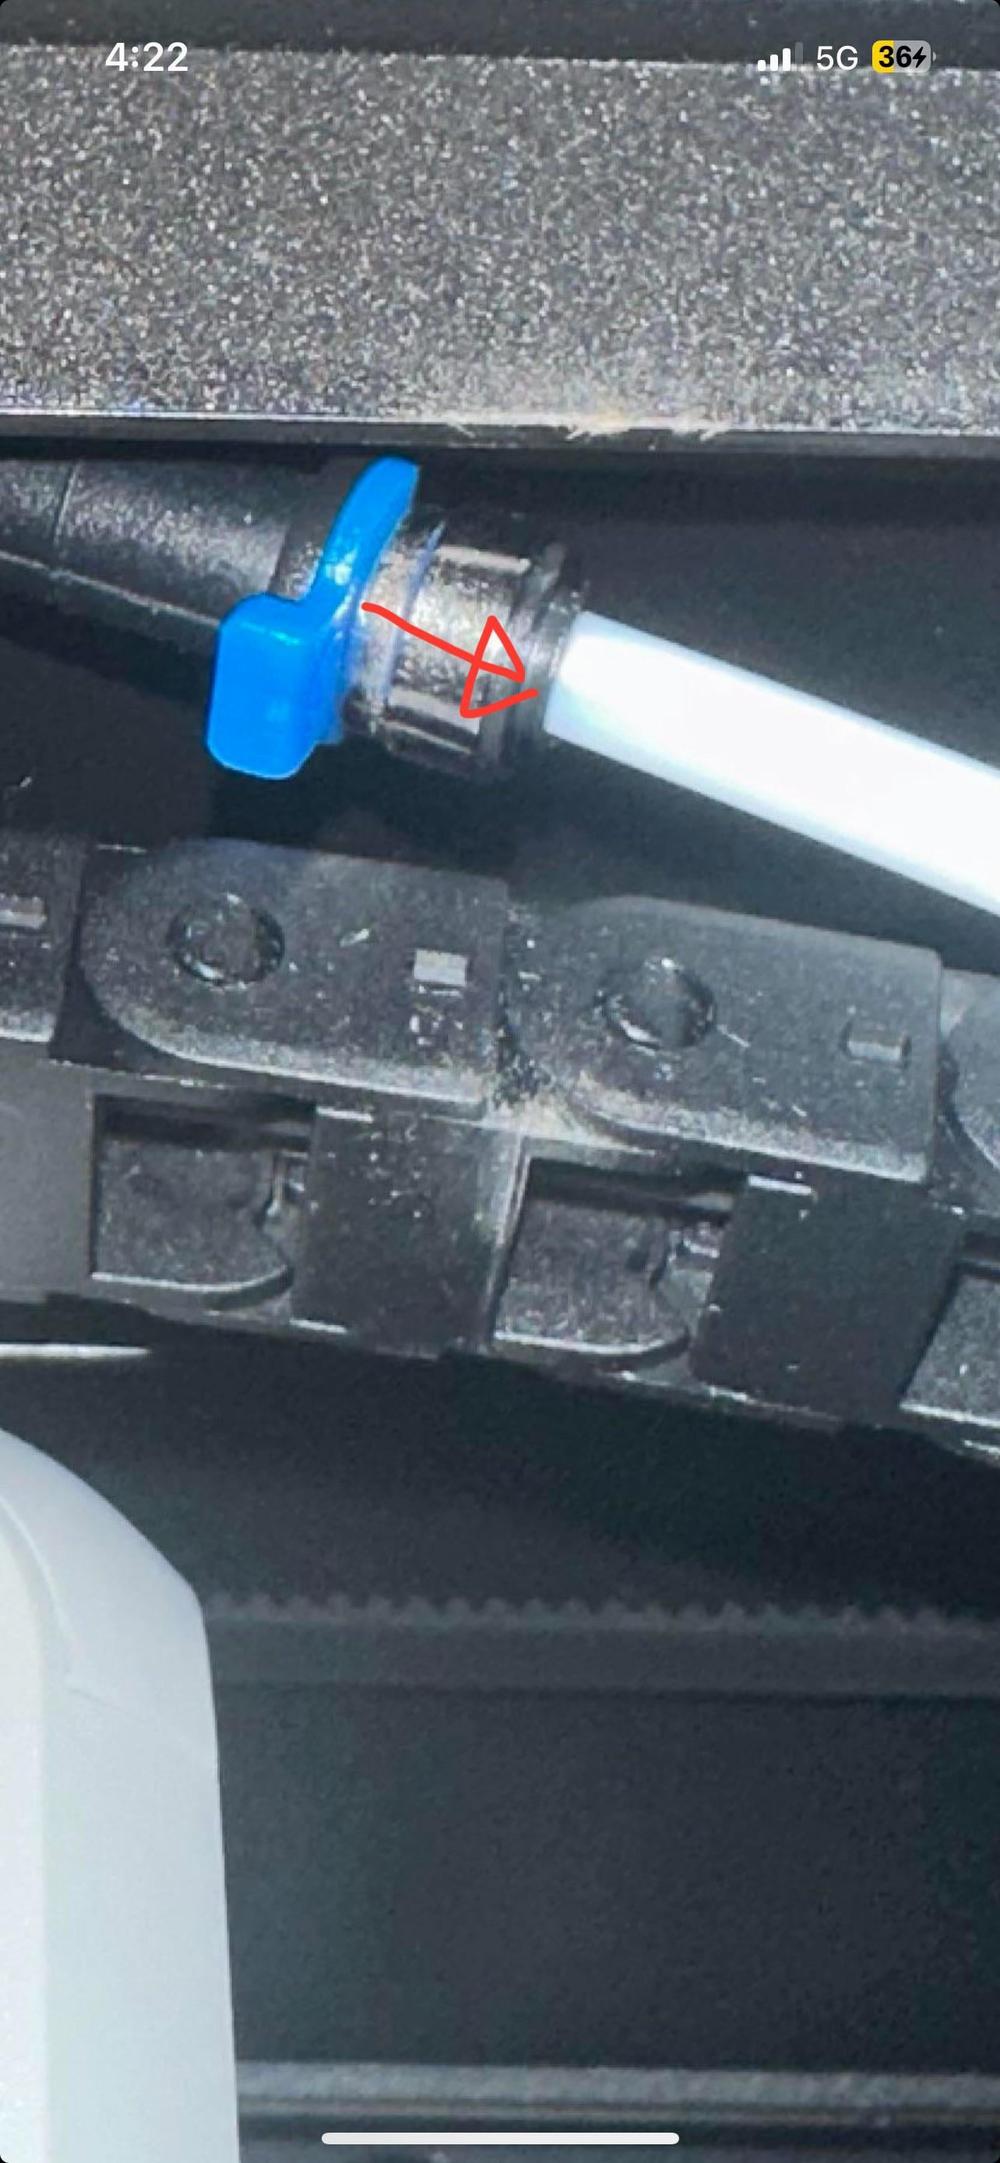 A red arrow points to a small blue plastic part that is attached to a white tube.